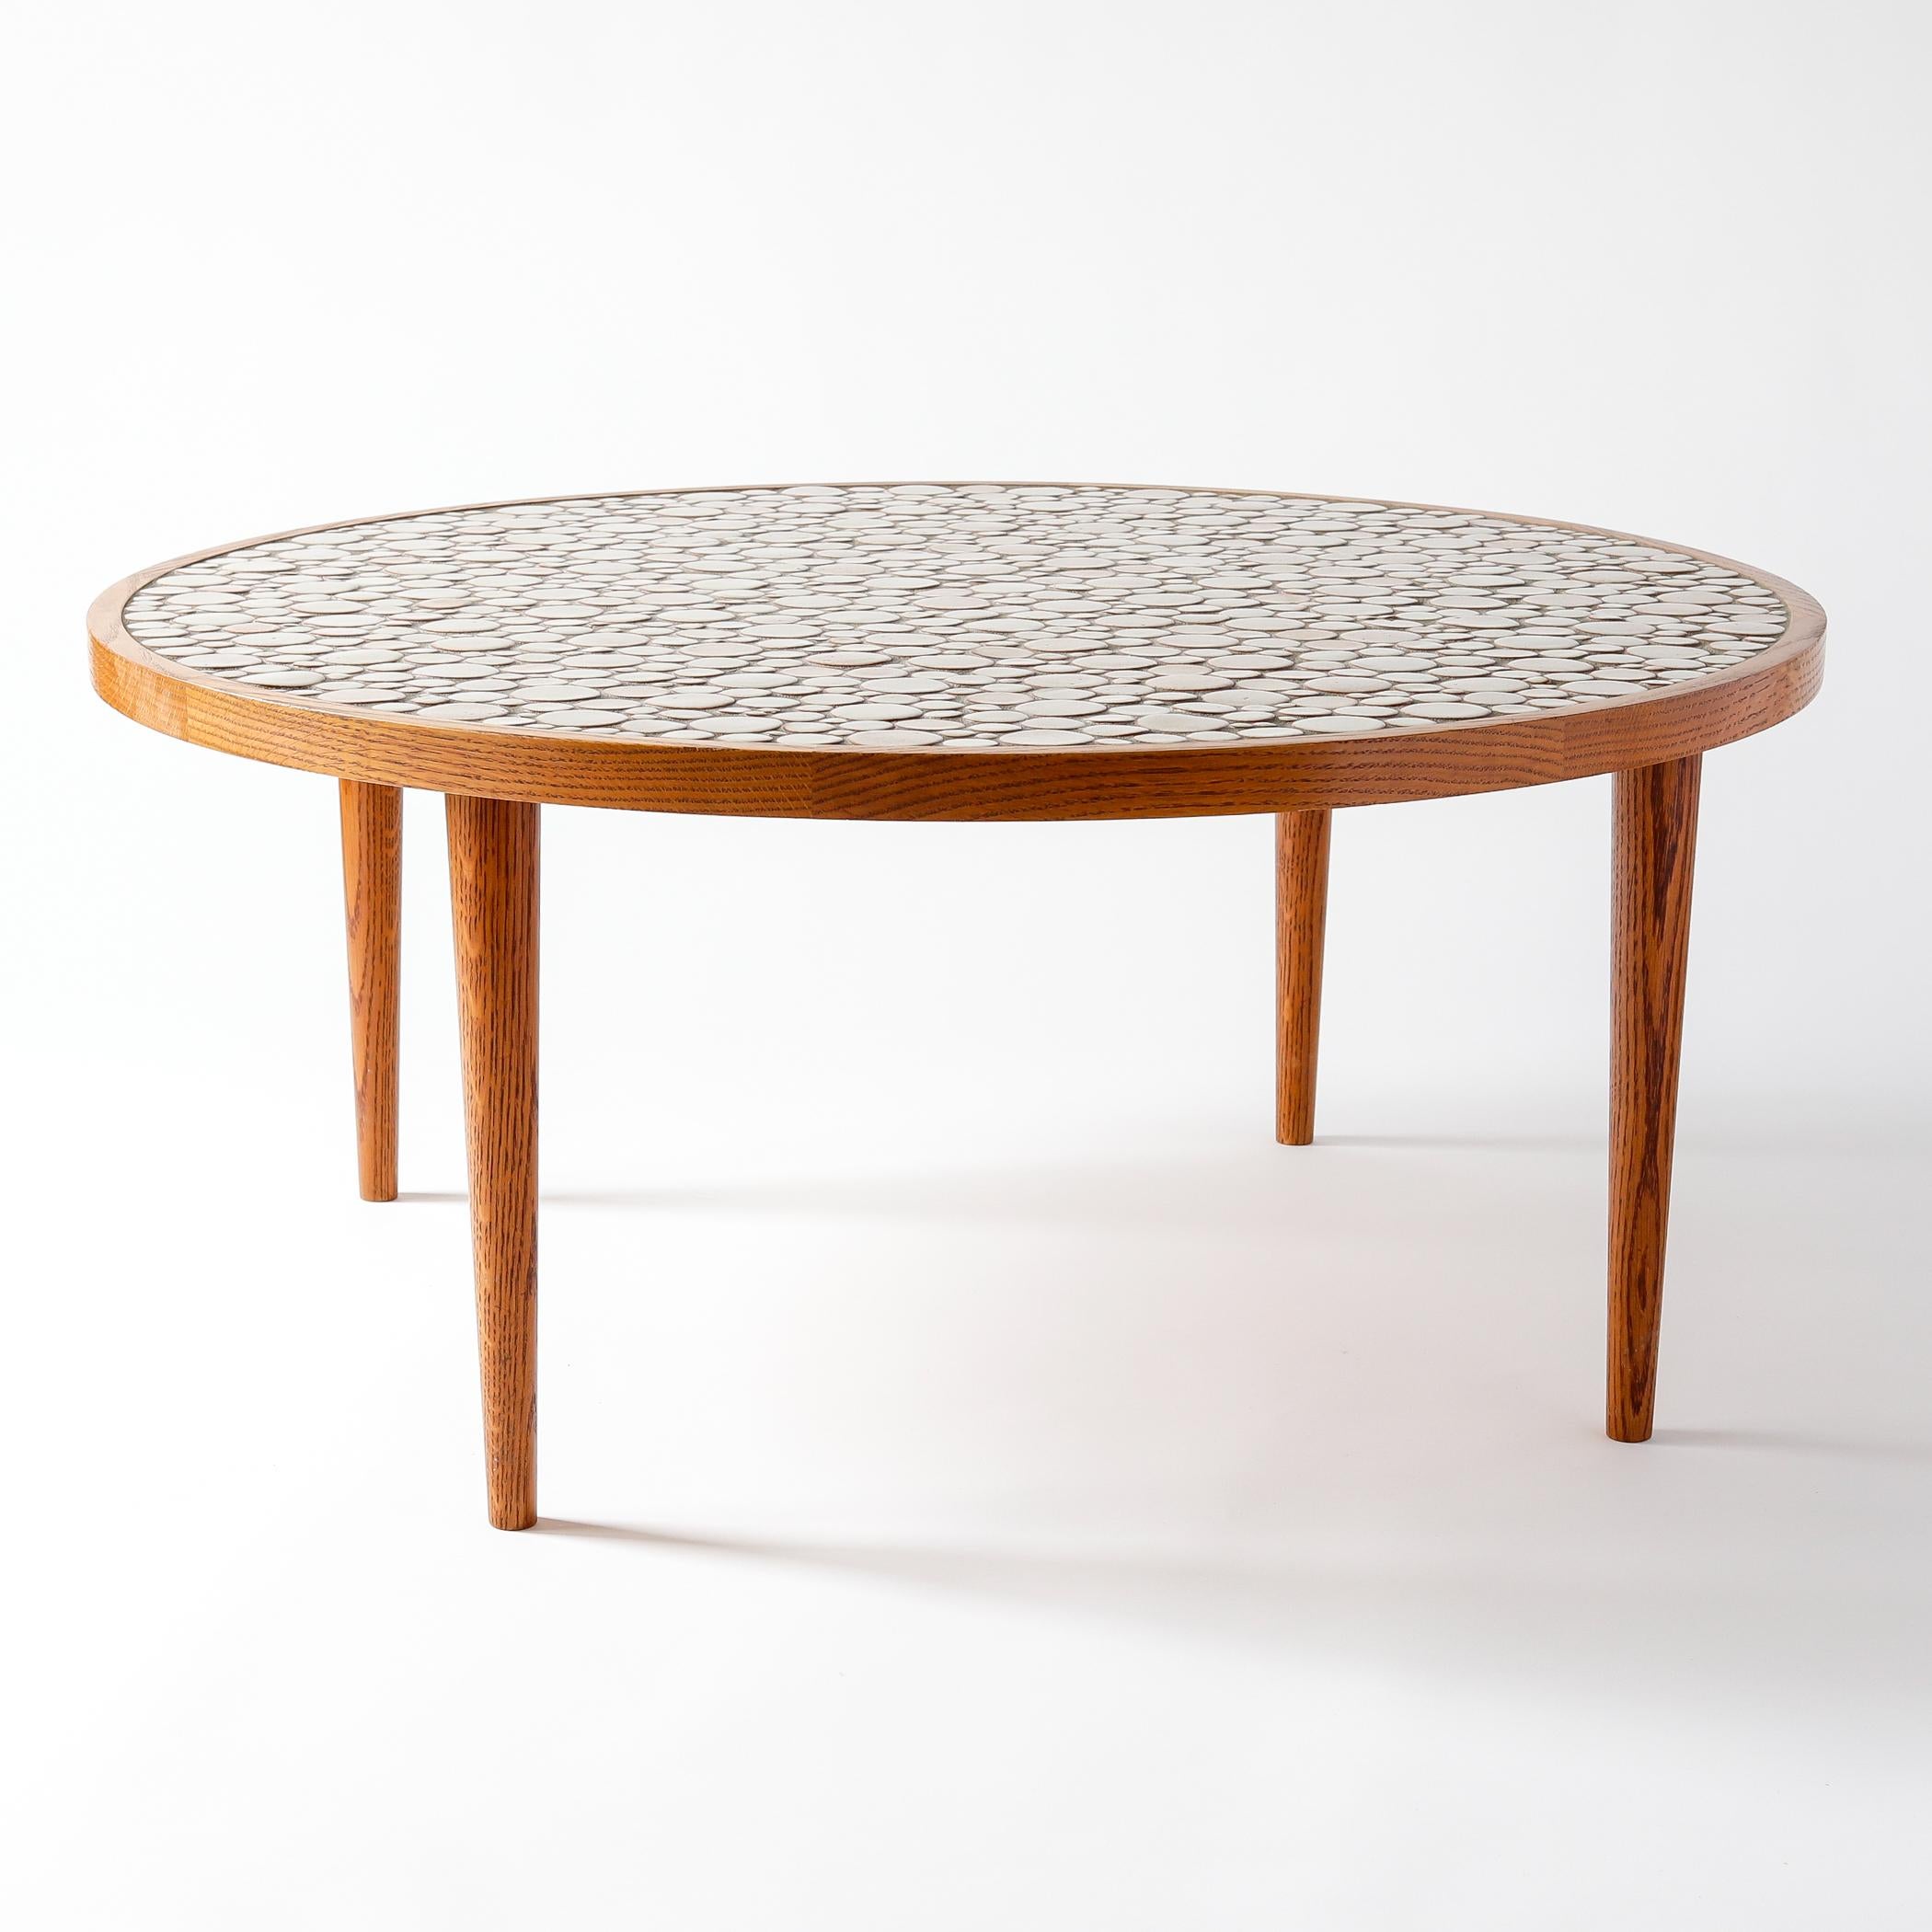 Mid-century oak and ceramic coffee table designed by Jane and Gordon Martz for Marshall Studios of Indiana. The oak frame has a circular top set with round tiles of various sizes in shades of beige.

Measures: 16 inches high, 36 1/2 inches